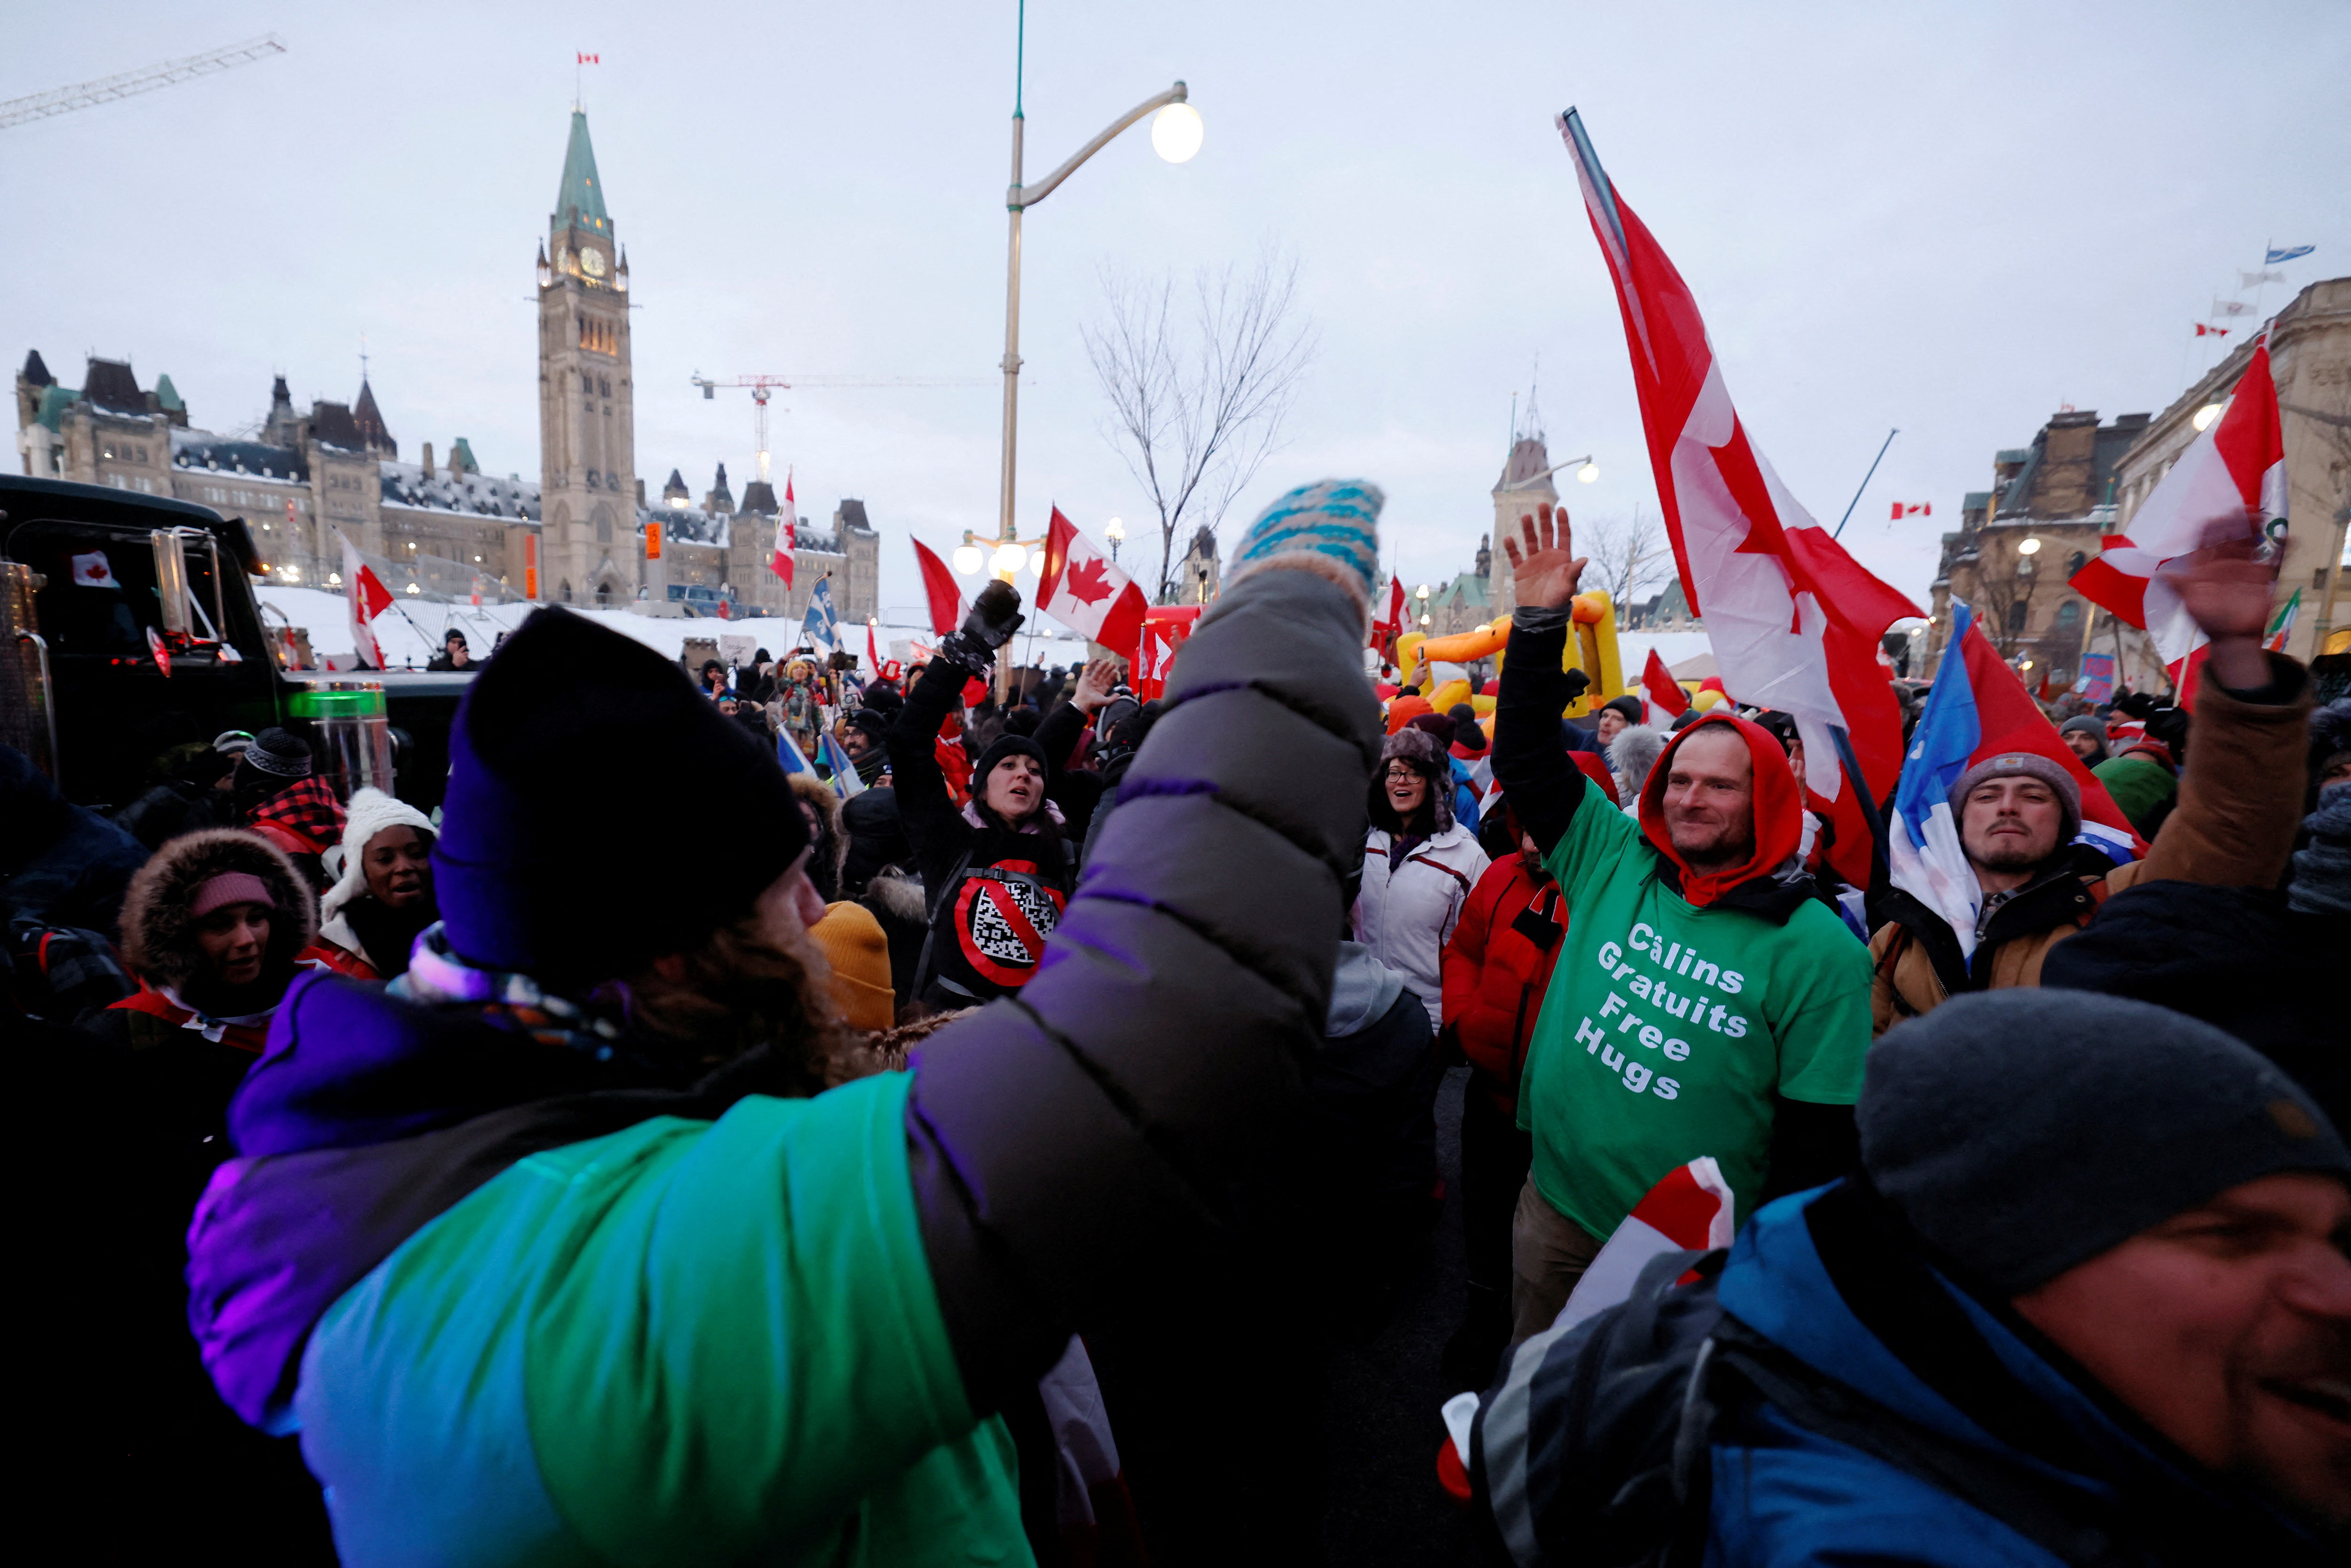 Canadian Freedom Convoy: Ottawa police address ongoing trucker protests, arrests of participants